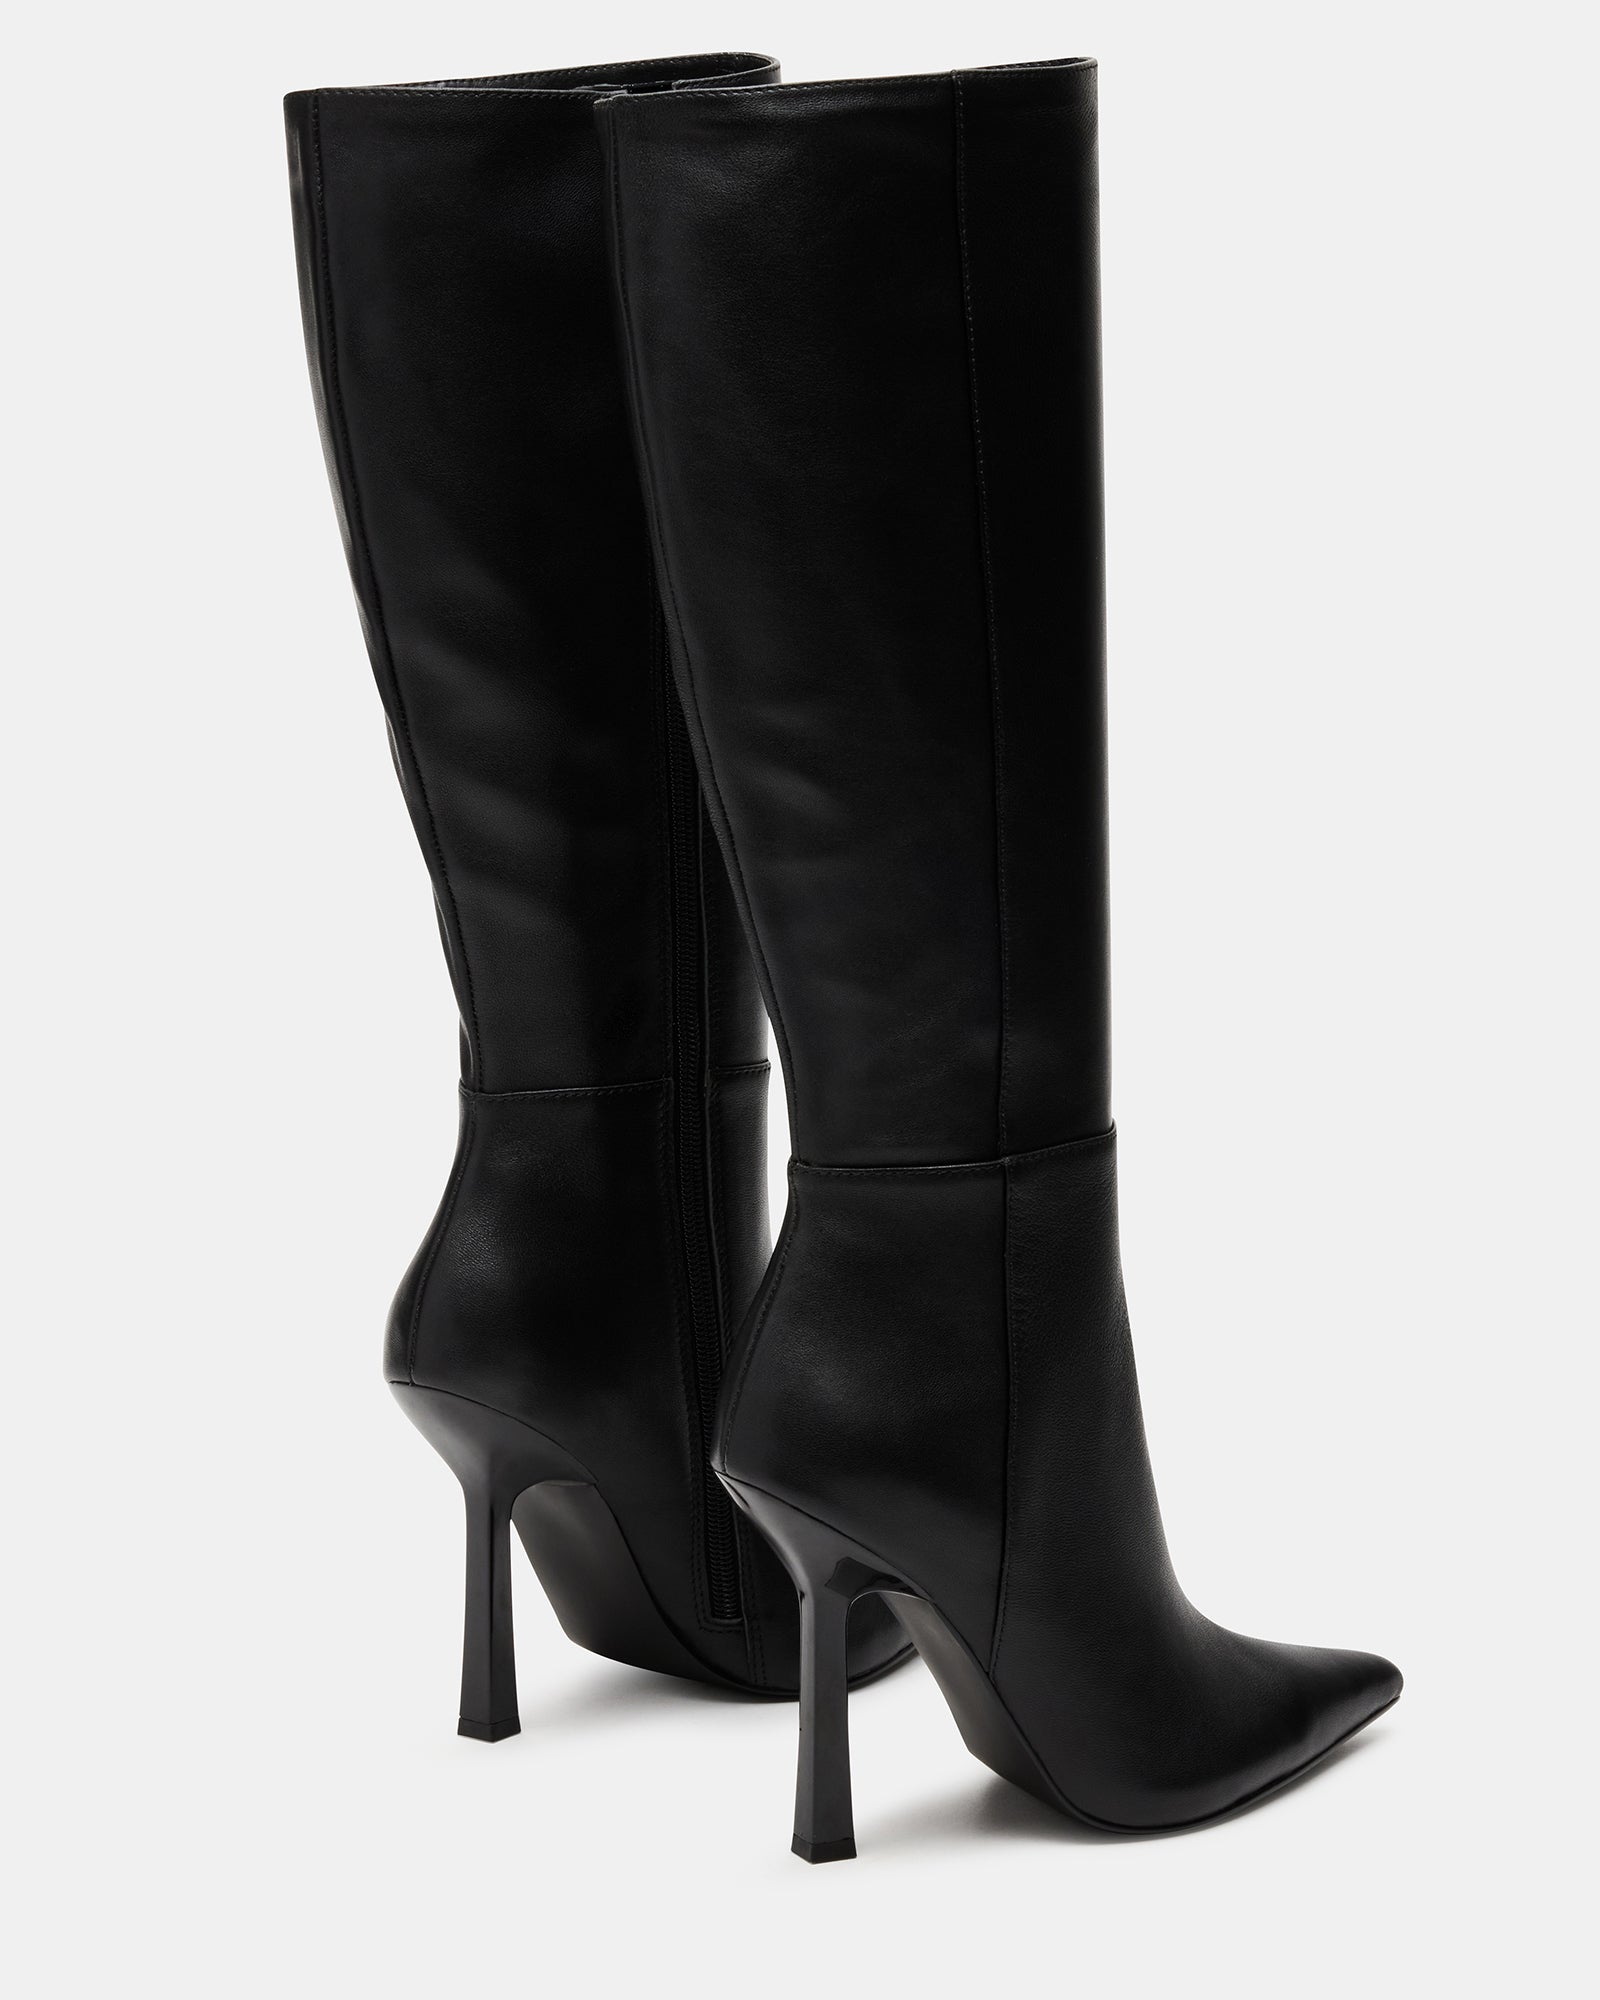 KATHLEEN Black Leather Knee High Boot | Women's Leather Boots – Steve ...